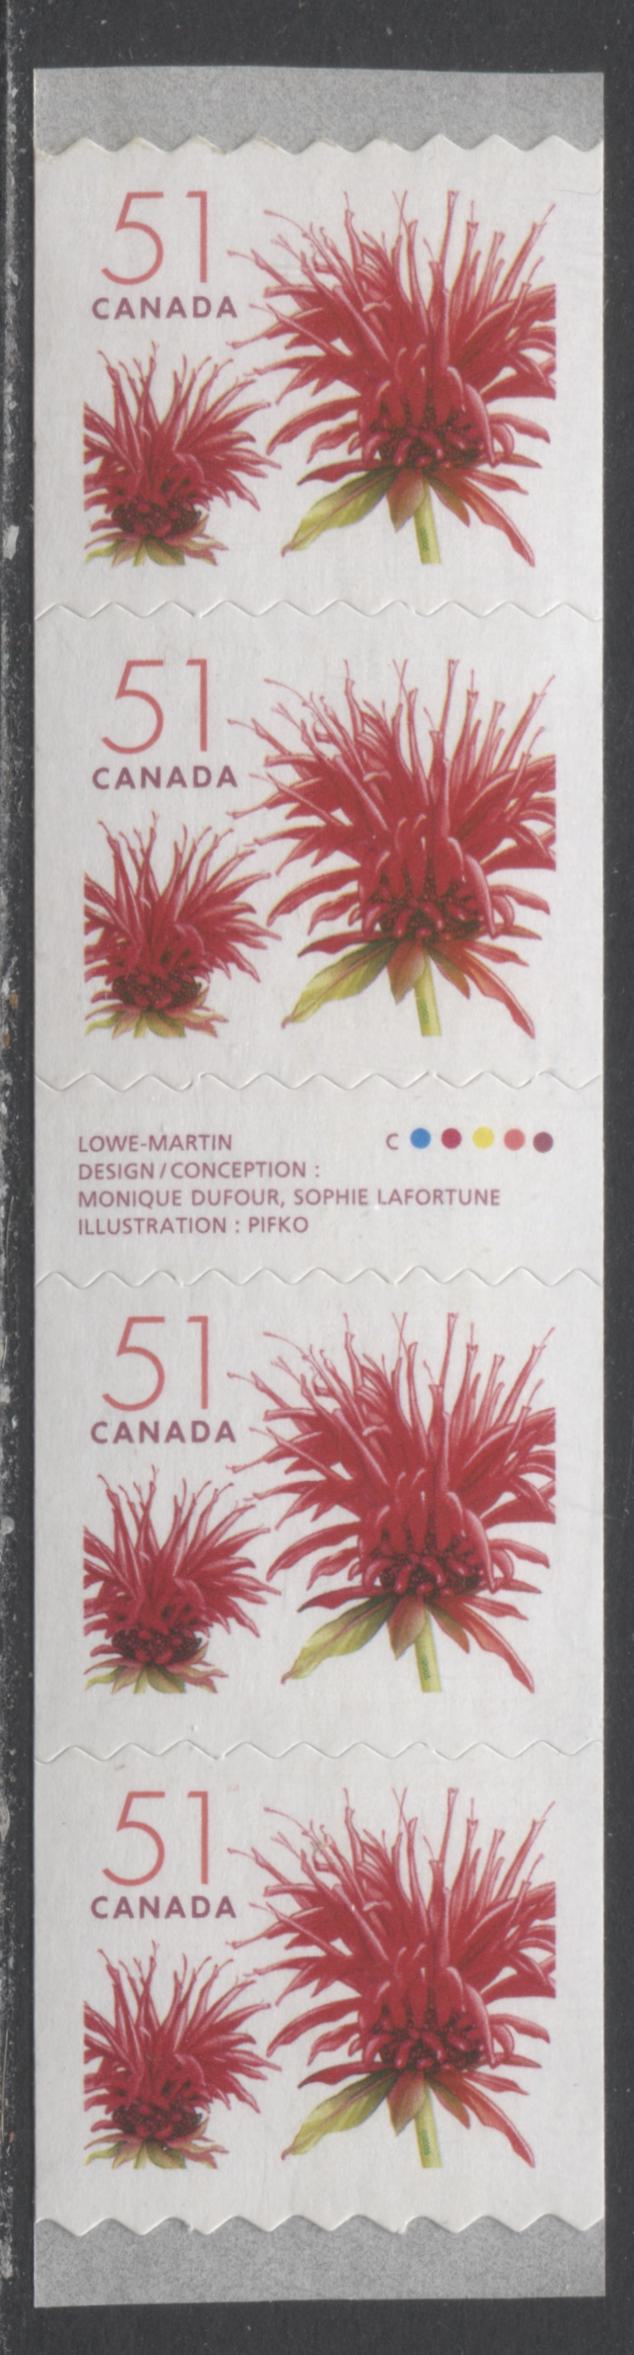 Lot 40 Canada #2128ii 51c Multicolored Red Bergamot, 2005-2006 Flower Definitives (2) - Coils, A VFNH Gutter Strip Of 4 On DF TRC Paper With Pale Washed Out Tagging, Showing Streak Into Last Stamp $15